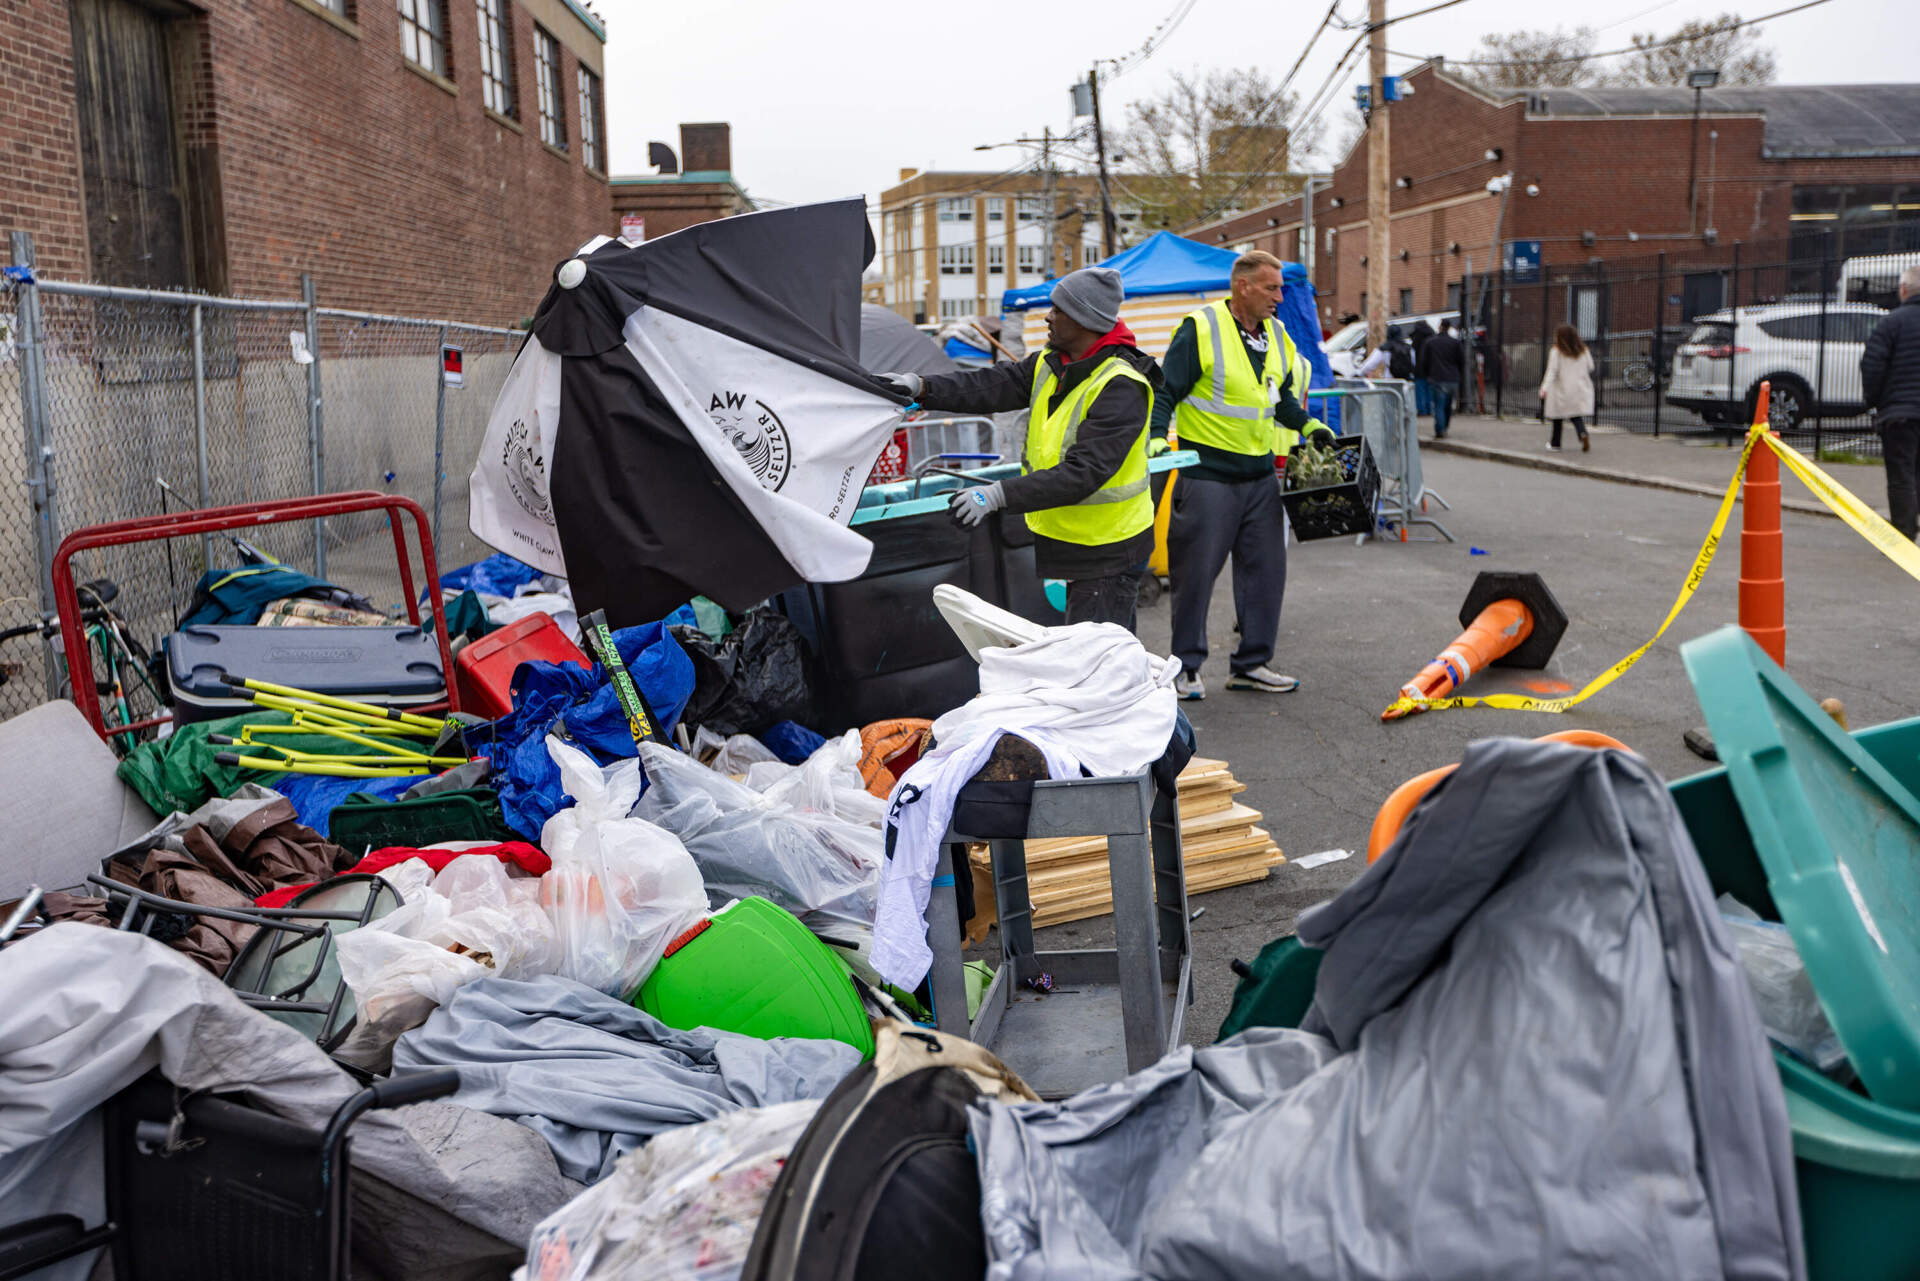 A volunteer from the Newmarket Business Improvement District throws an umbrella away into a large pile of trash. (Jesse Costa/WBUR)